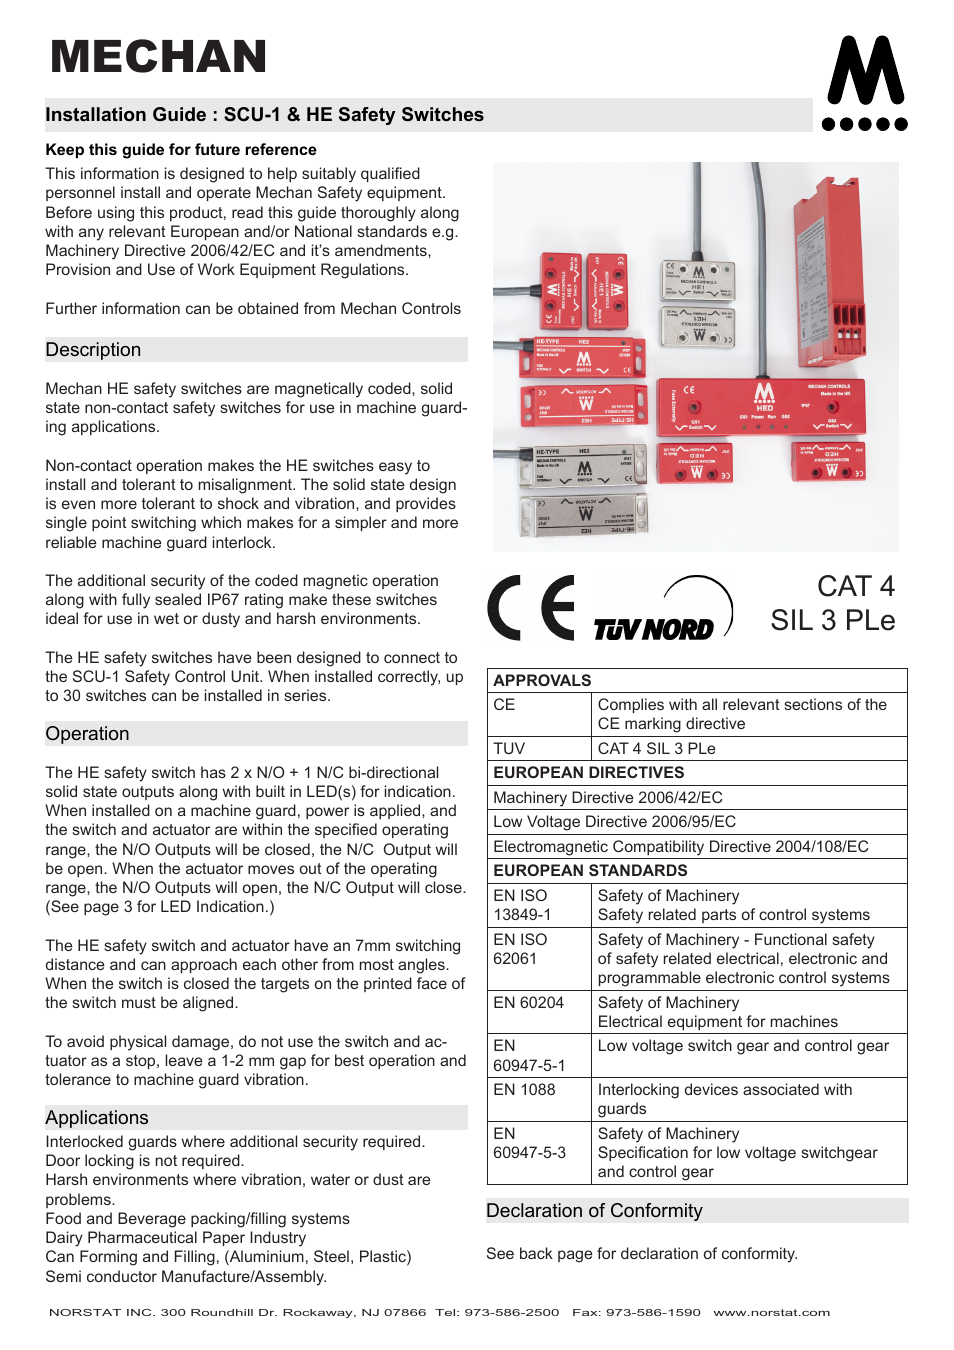 NORSTAT Non-Contact Safety Switches User Manual | 8 pages